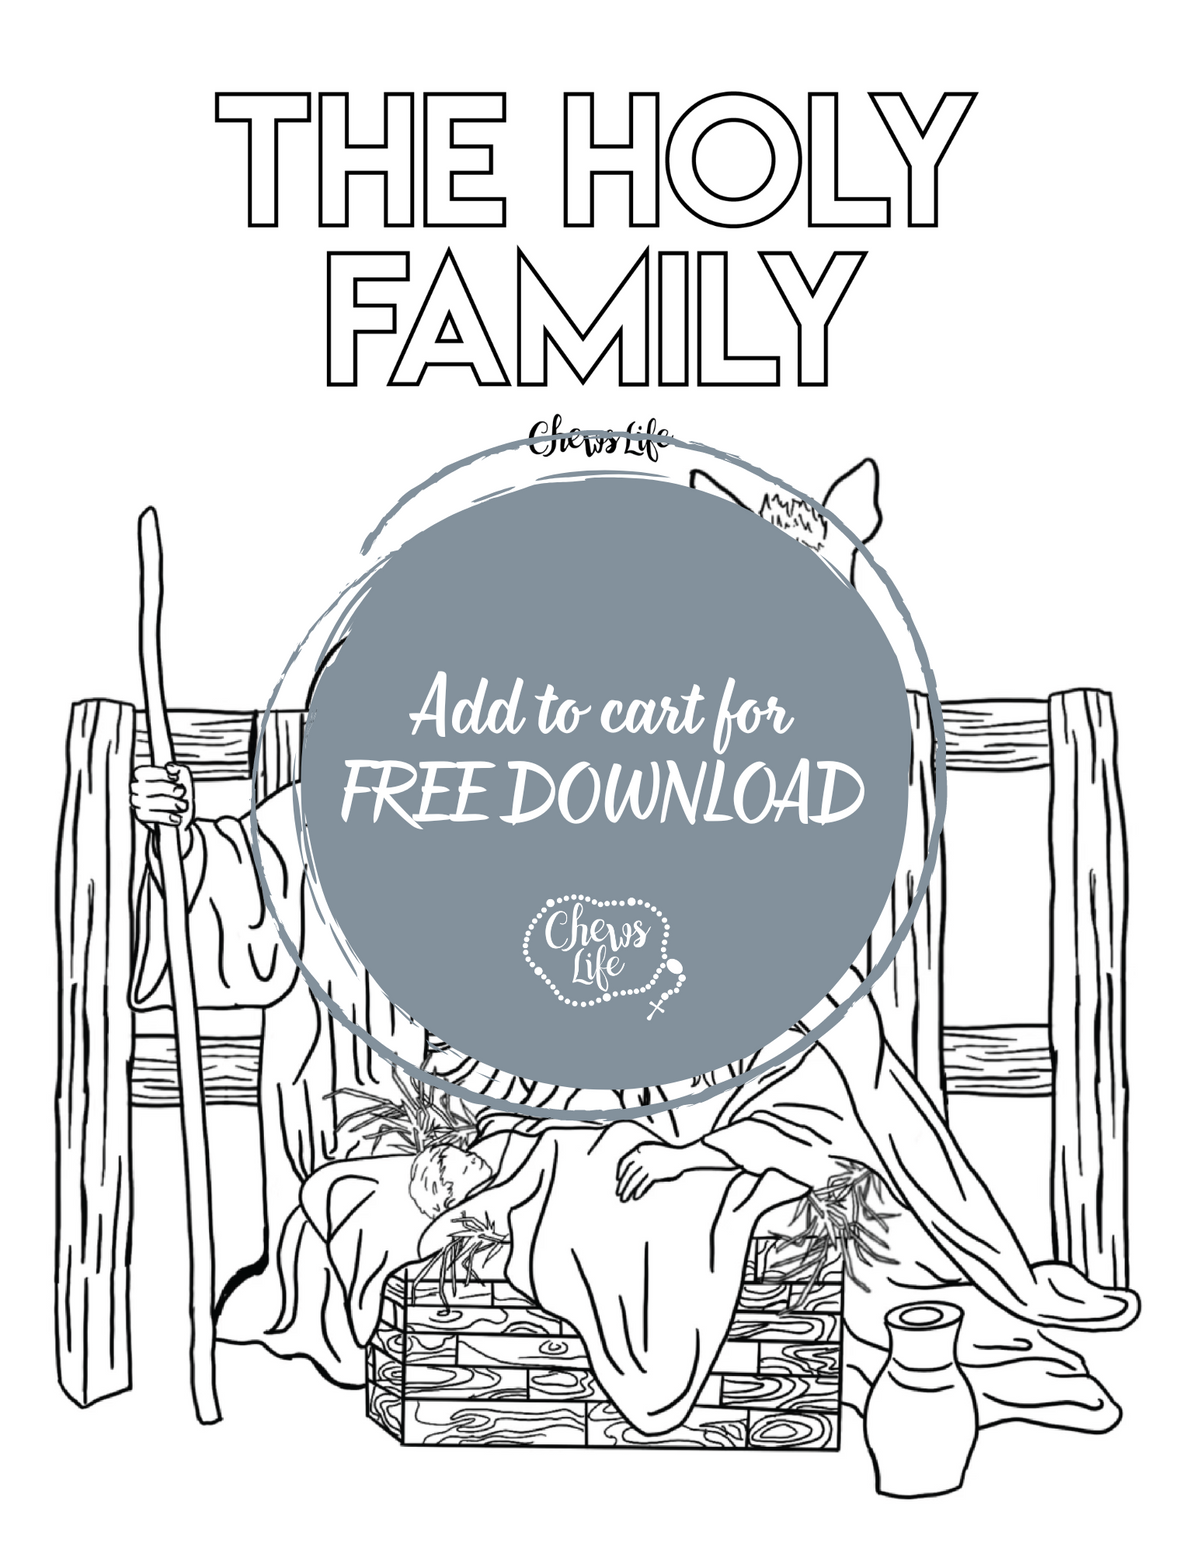 Holy Family Coloring Page | Downloadable